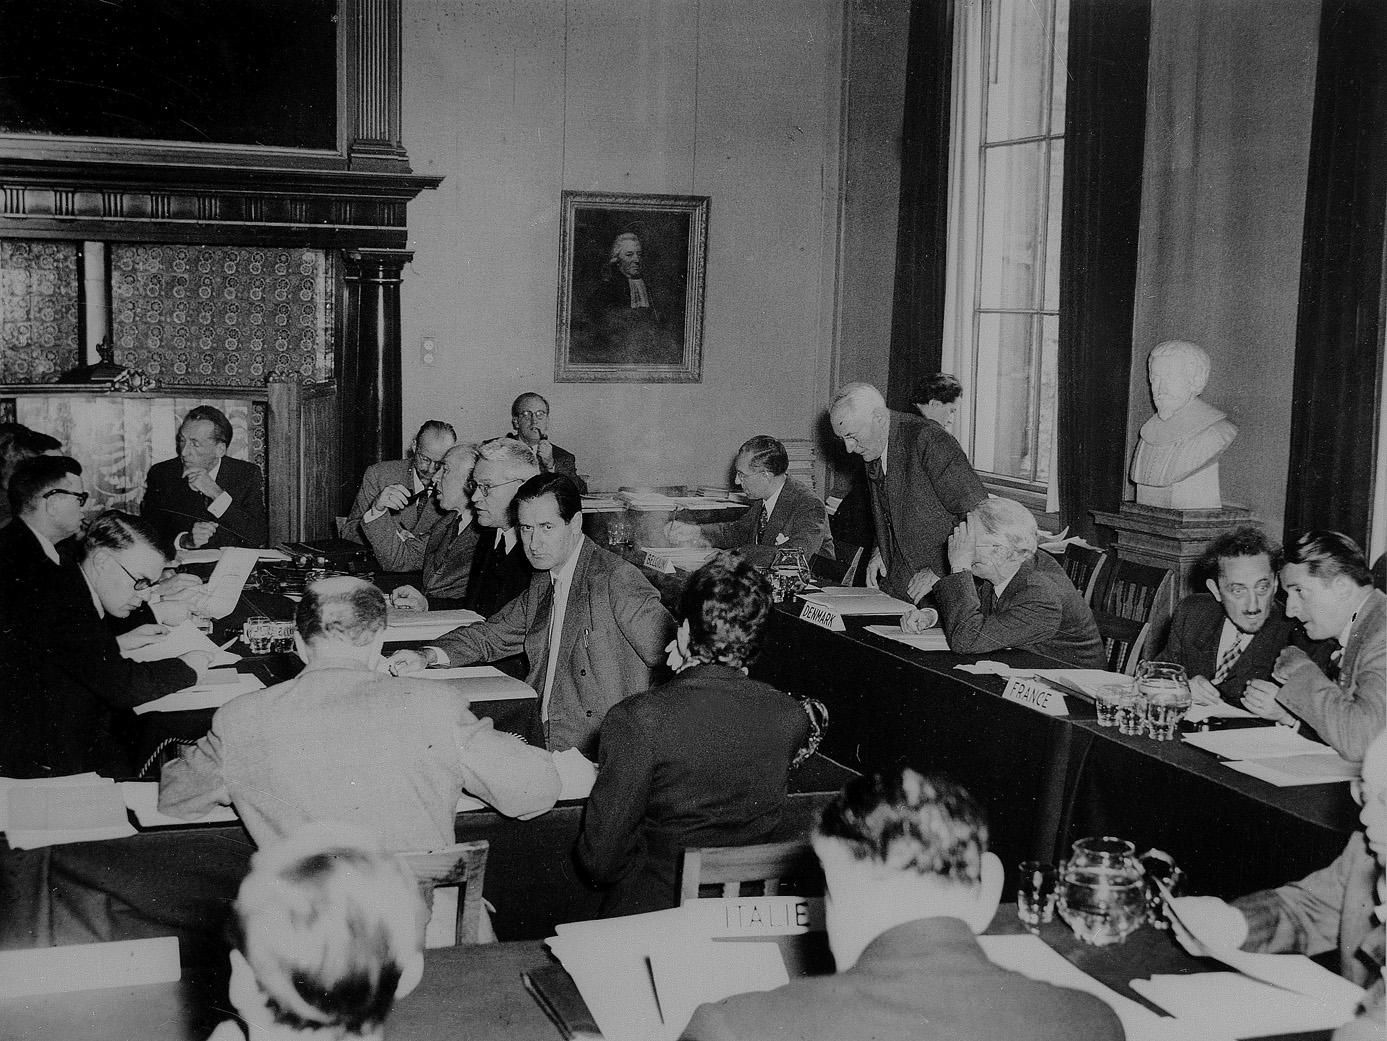 Many of CERN’s founders gathered for the Third Session of the provisional CERN Council in Amsterdam on 4 October 1952